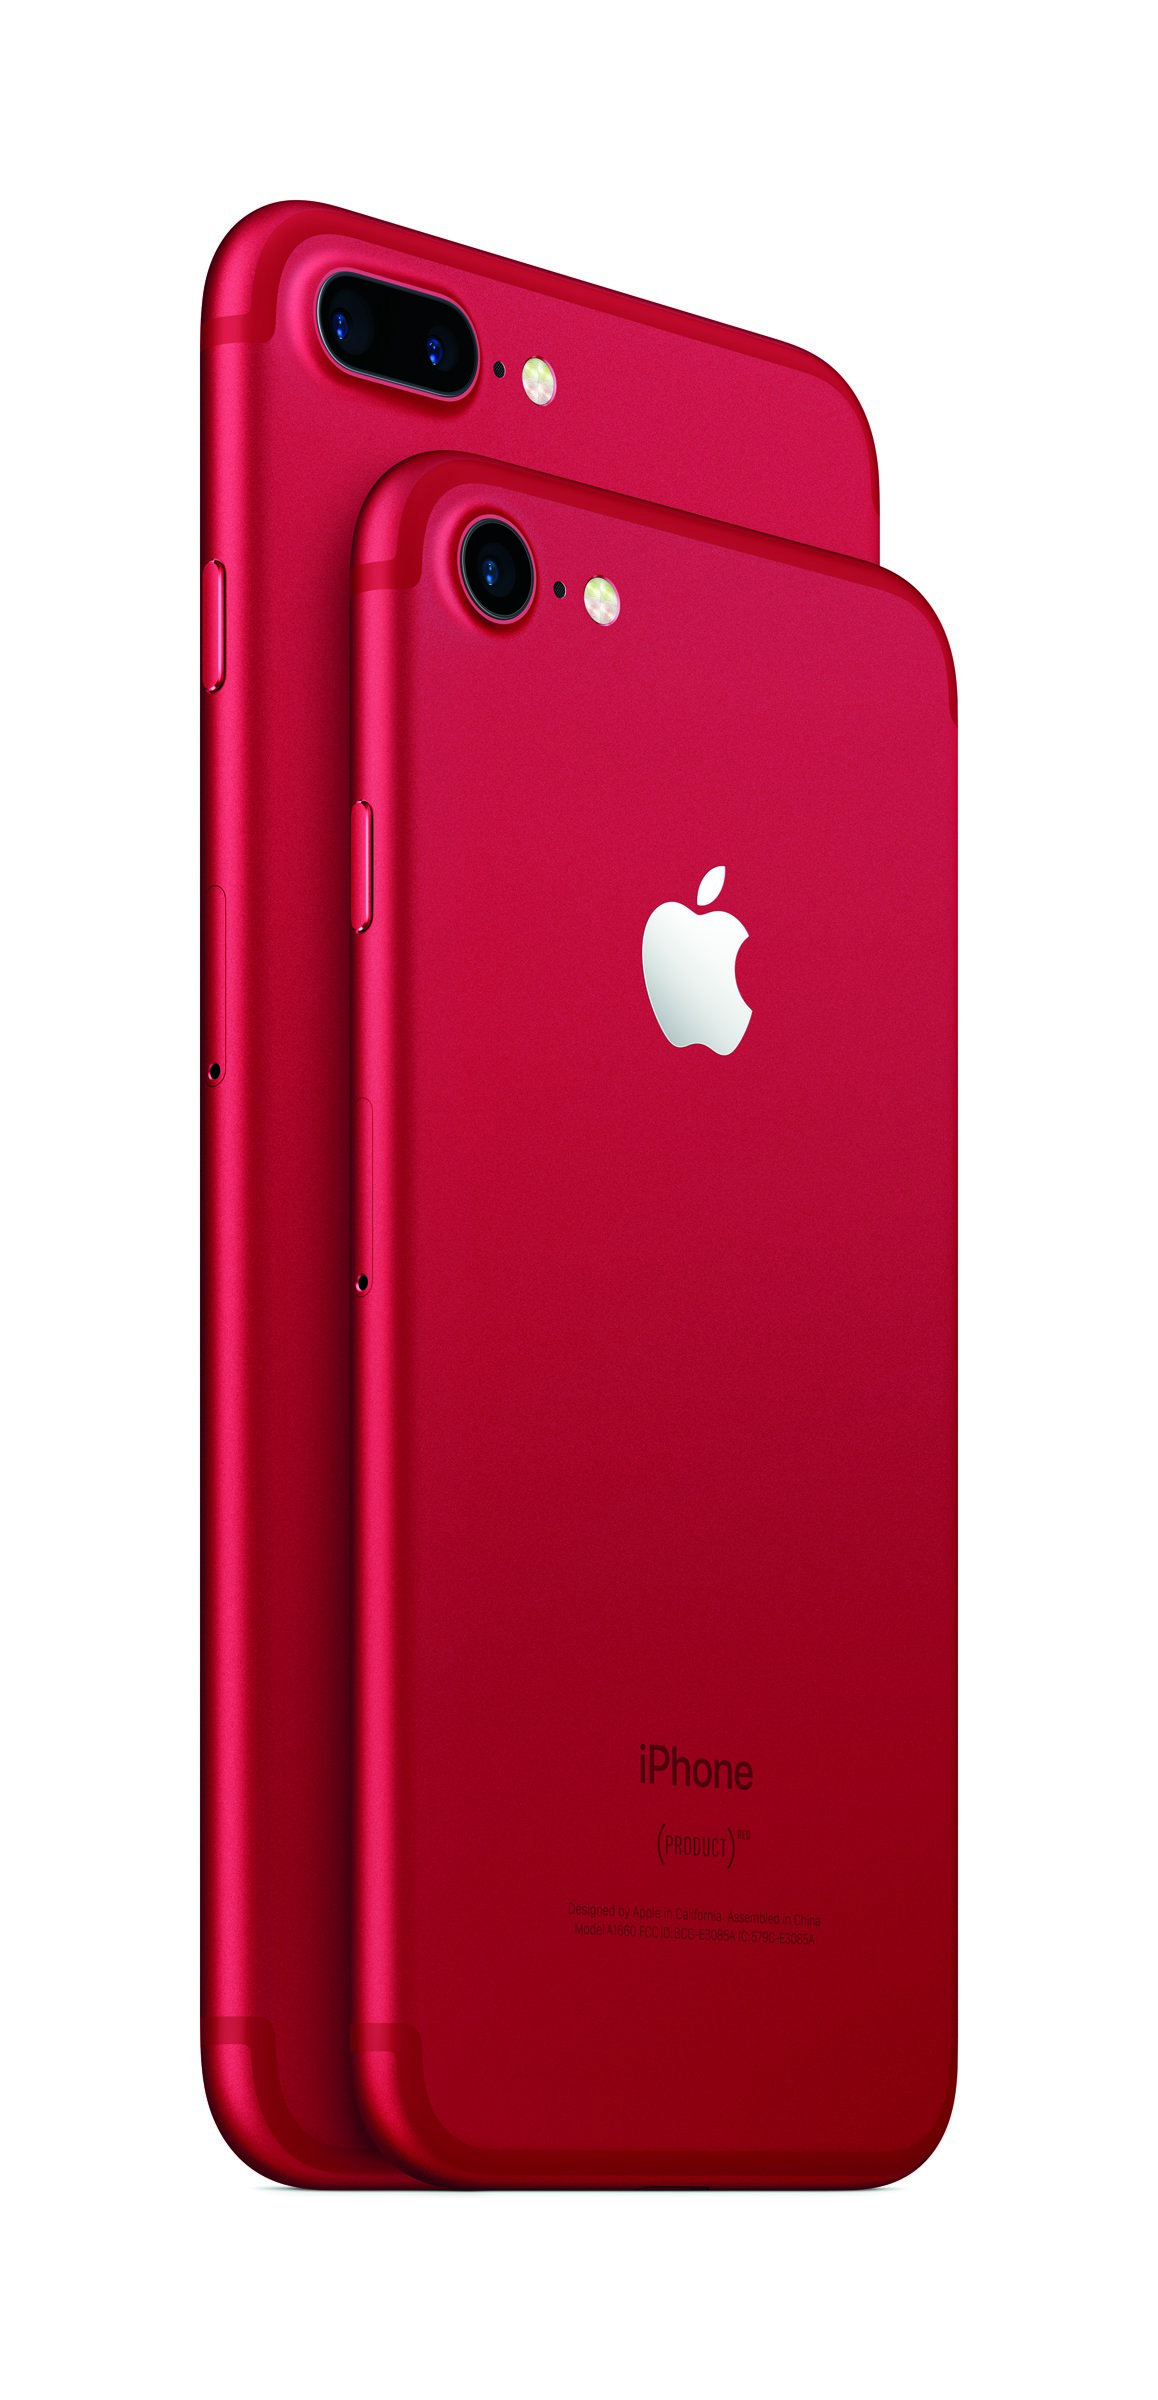 Iphone 7 And Iphone 7 Plus Product Red Coming Soon To Sa On Check By